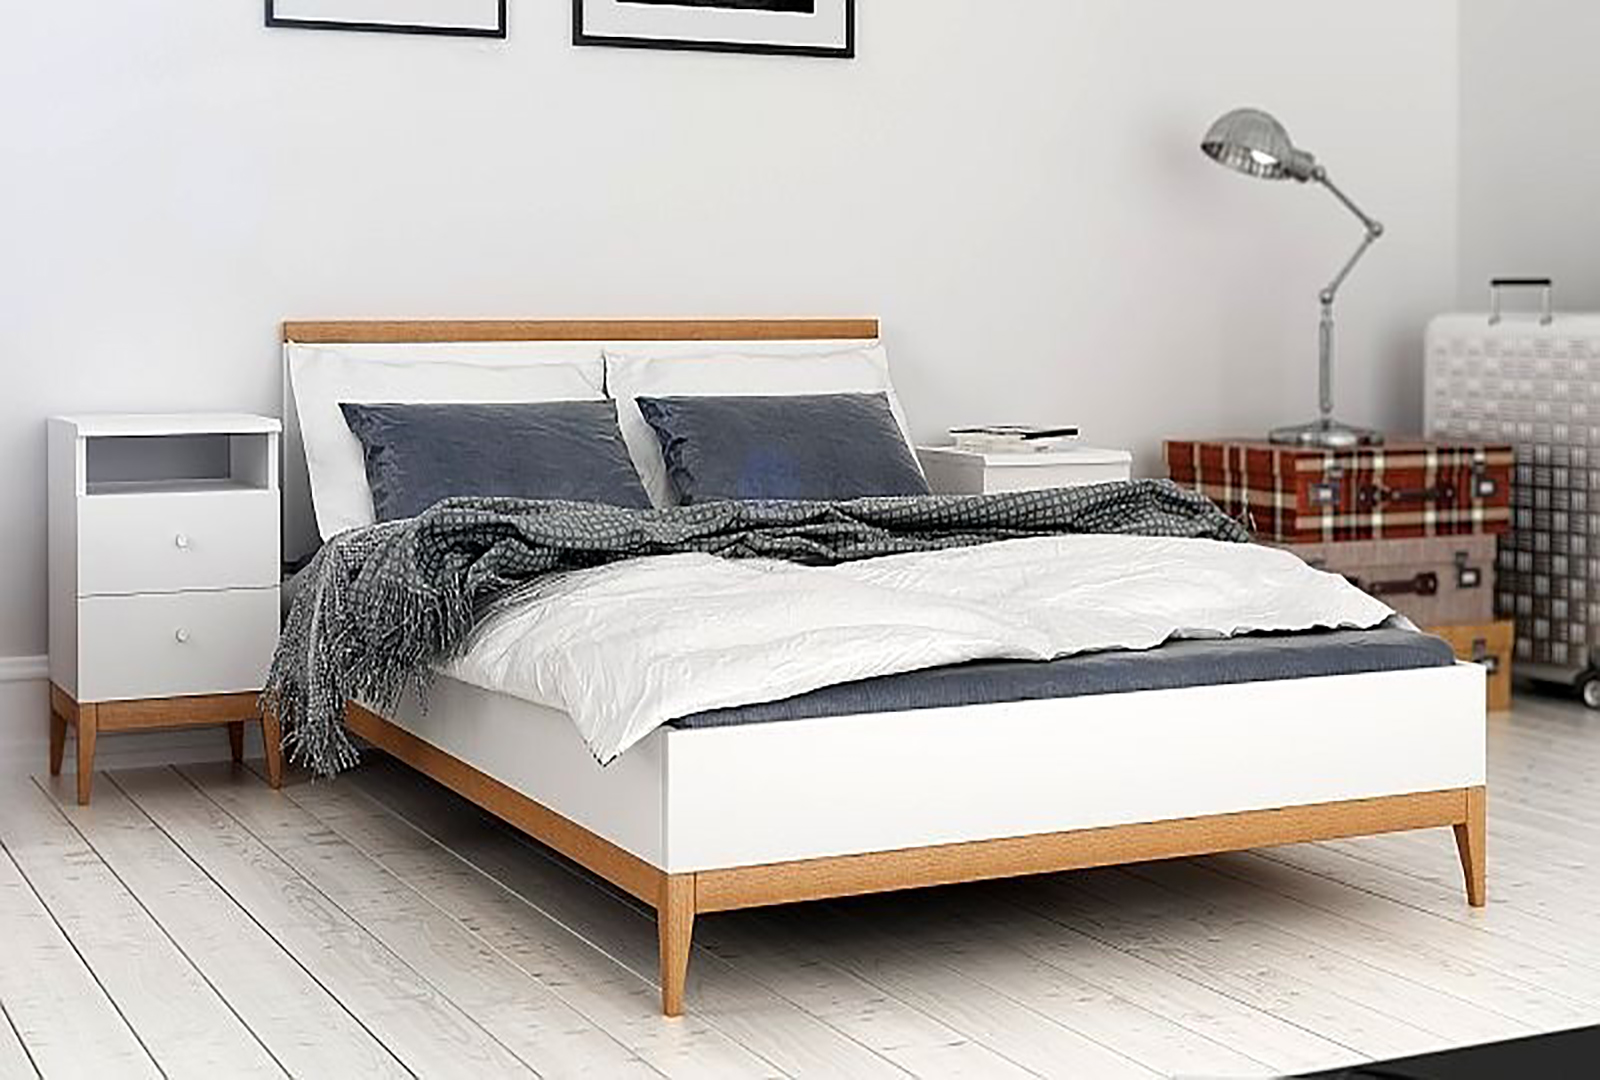 VISBY LIVIA WOODEN BED 4